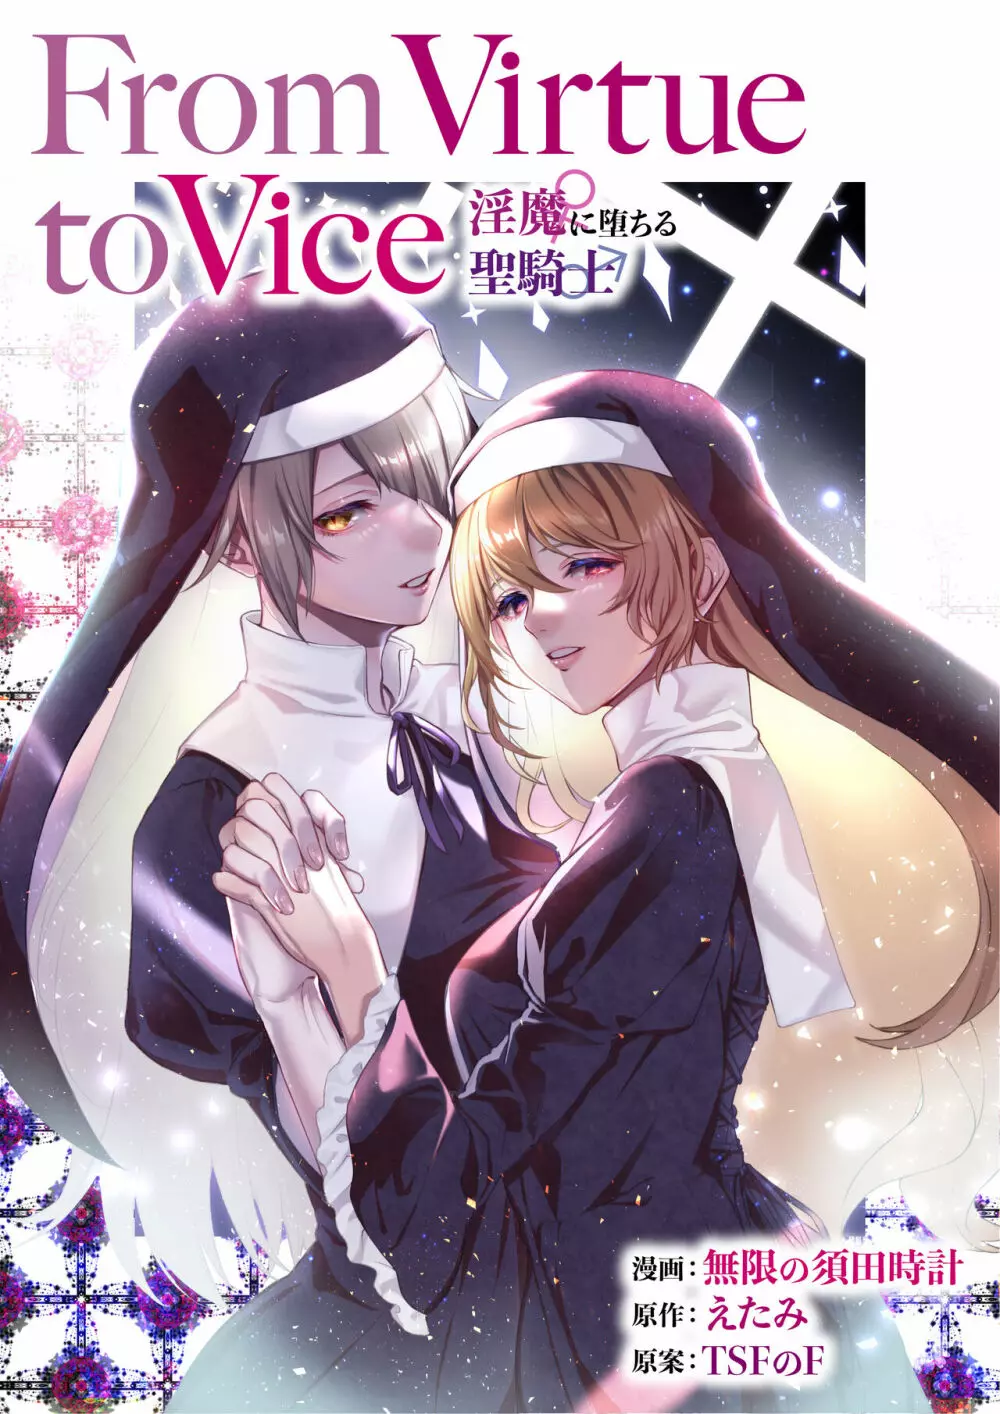 From Virtue to Vice ～淫魔♀に堕ちる聖騎士♂～